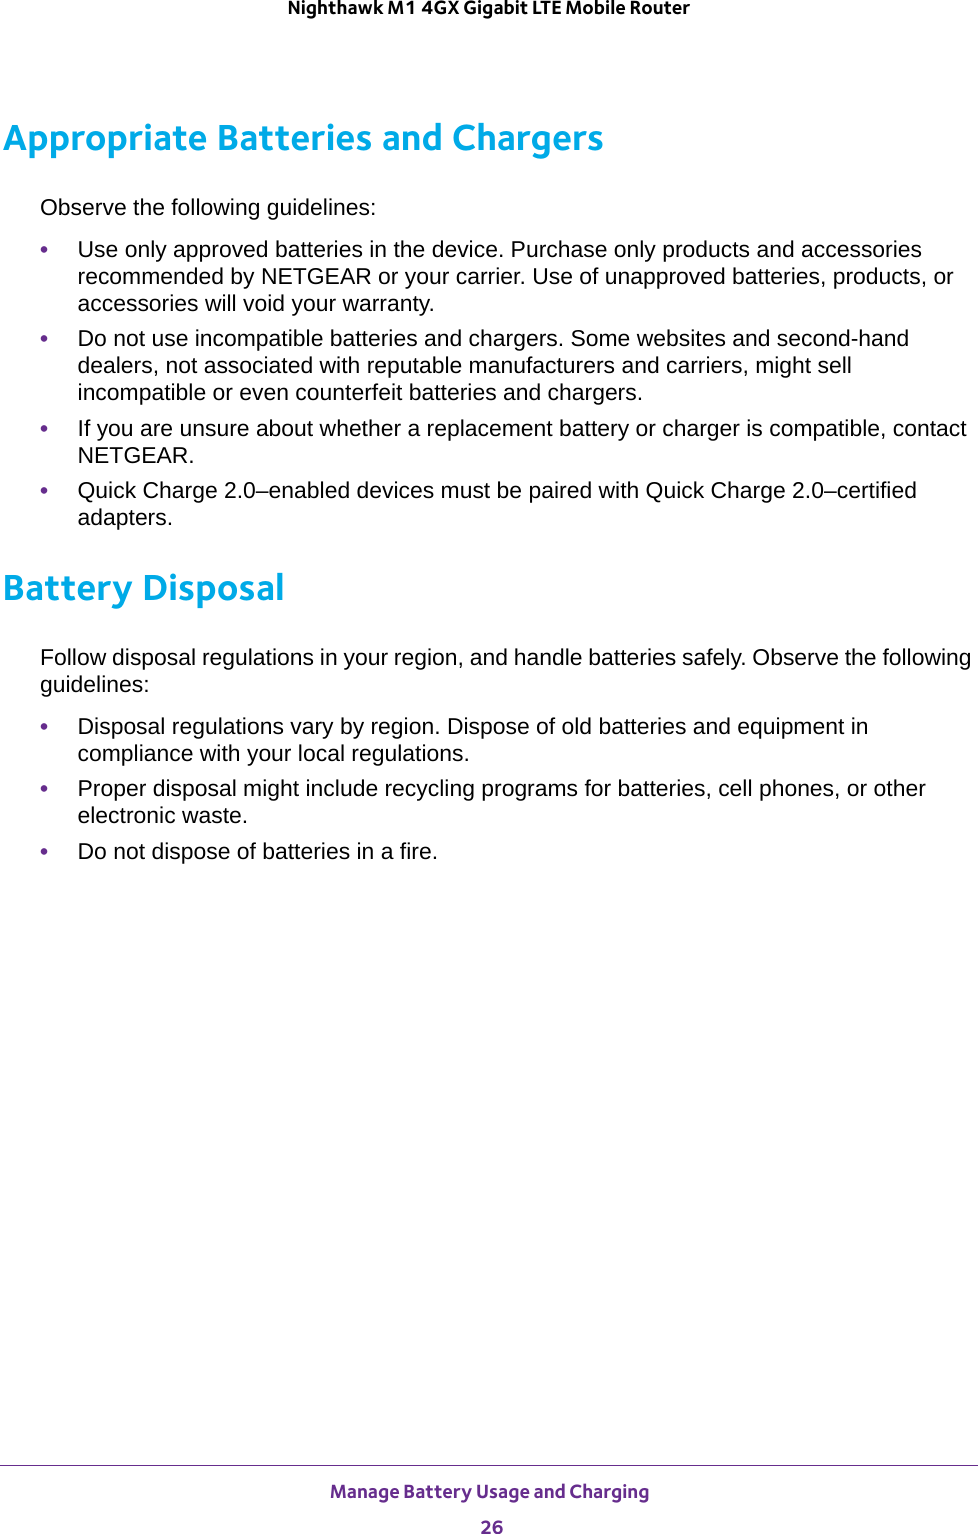 Manage Battery Usage and Charging 26Nighthawk M1 4GX Gigabit LTE Mobile Router Appropriate Batteries and ChargersObserve the following guidelines:•Use only approved batteries in the device. Purchase only products and accessories recommended by NETGEAR or your carrier. Use of unapproved batteries, products, or accessories will void your warranty.•Do not use incompatible batteries and chargers. Some websites and second-hand dealers, not associated with reputable manufacturers and carriers, might sell incompatible or even counterfeit batteries and chargers. •If you are unsure about whether a replacement battery or charger is compatible, contact NETGEAR.•Quick Charge 2.0–enabled devices must be paired with Quick Charge 2.0–certified adapters.Battery DisposalFollow disposal regulations in your region, and handle batteries safely. Observe the following guidelines:•Disposal regulations vary by region. Dispose of old batteries and equipment in compliance with your local regulations.•Proper disposal might include recycling programs for batteries, cell phones, or other electronic waste.•Do not dispose of batteries in a fire.